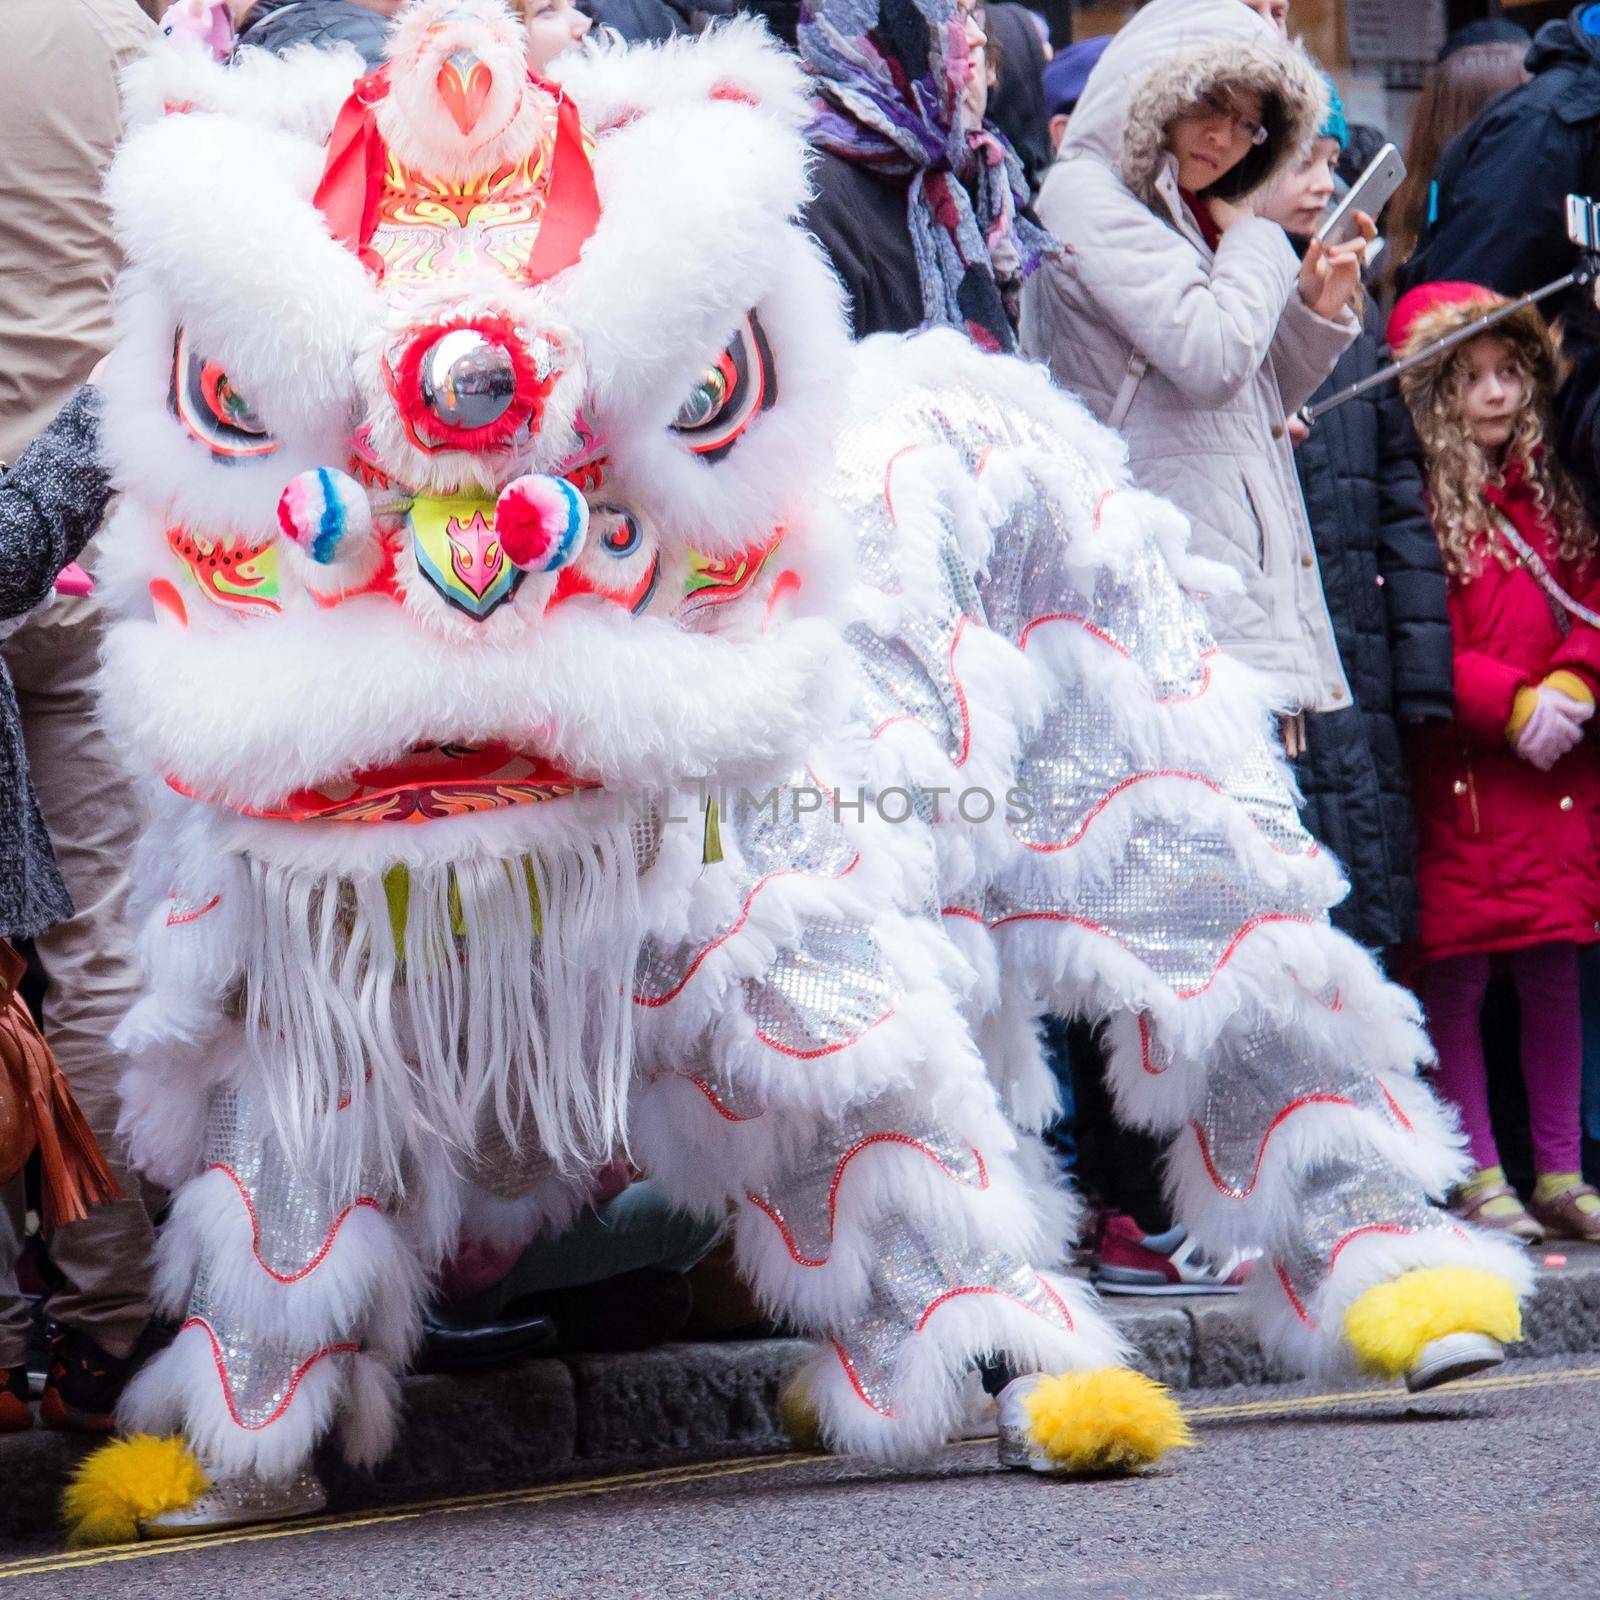 Chinese New Year celebration parade with detail photo of the iconic white lion in a power pose. by jyurinko